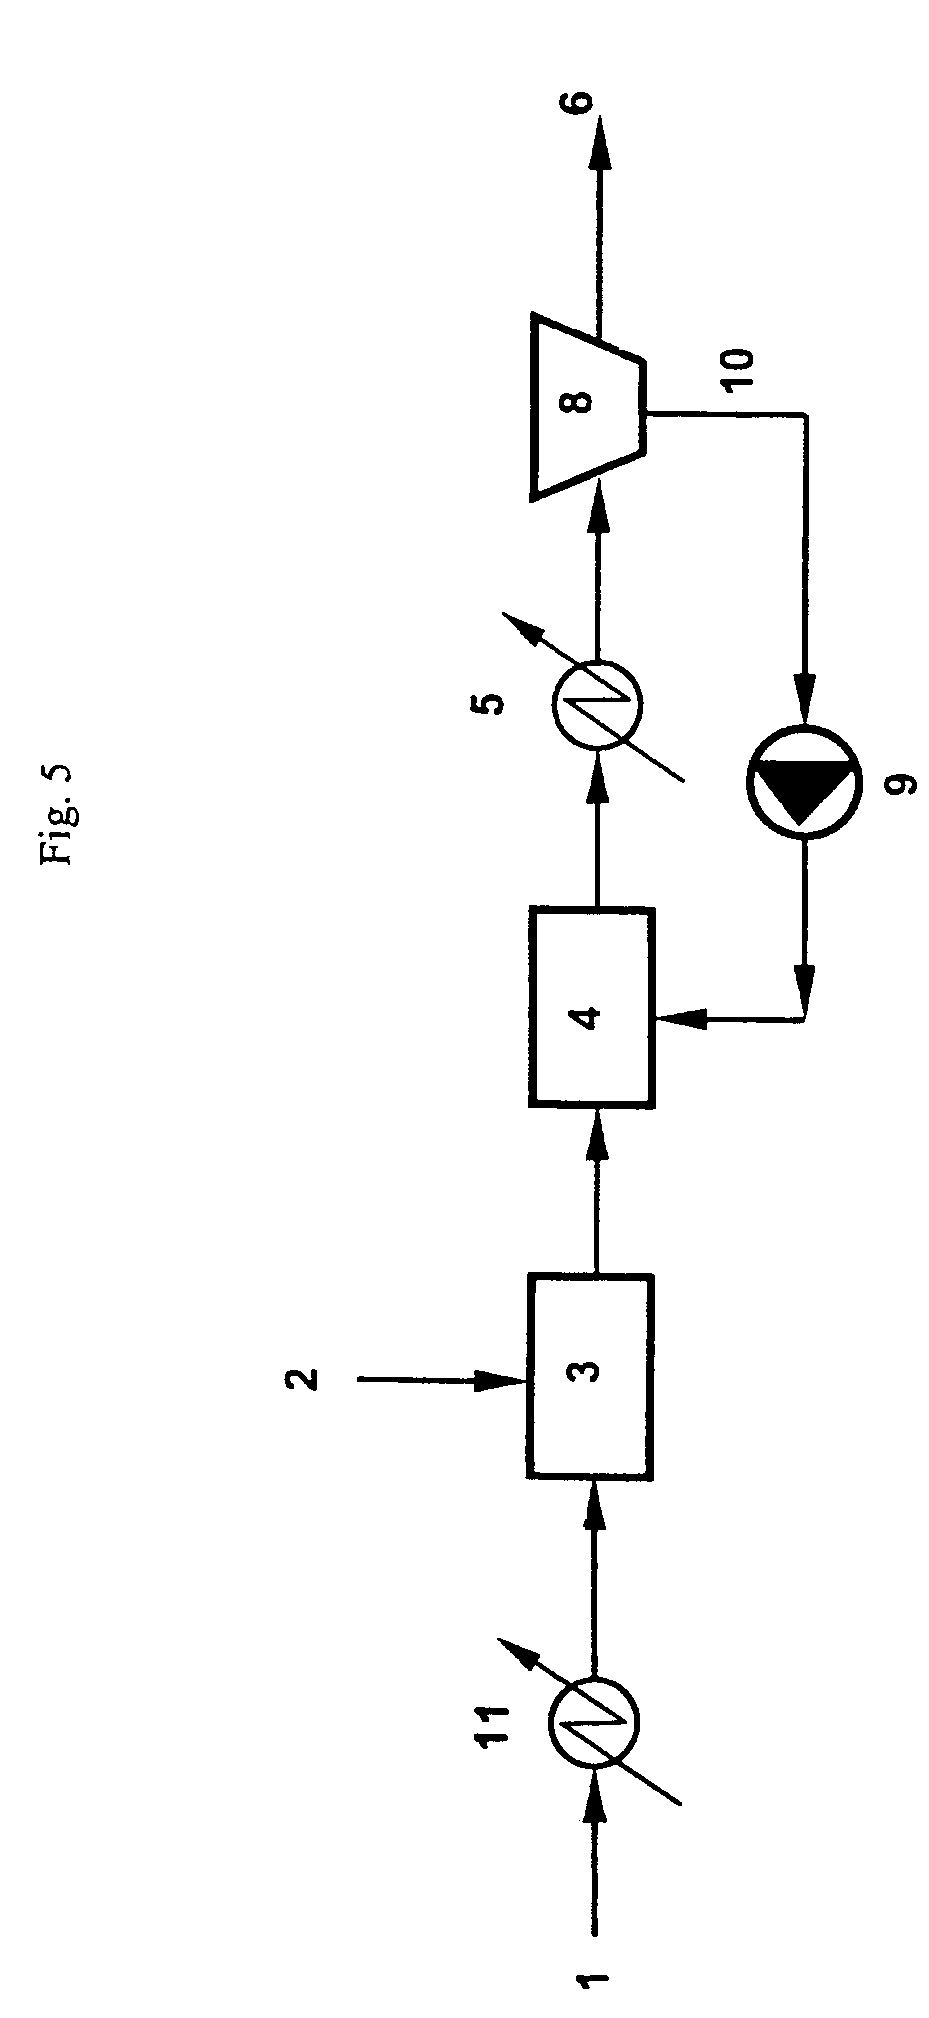 Method and system for transporting flows of fluid hydrocarbons containing wax, asphaltenes, and/or other precipitating solids